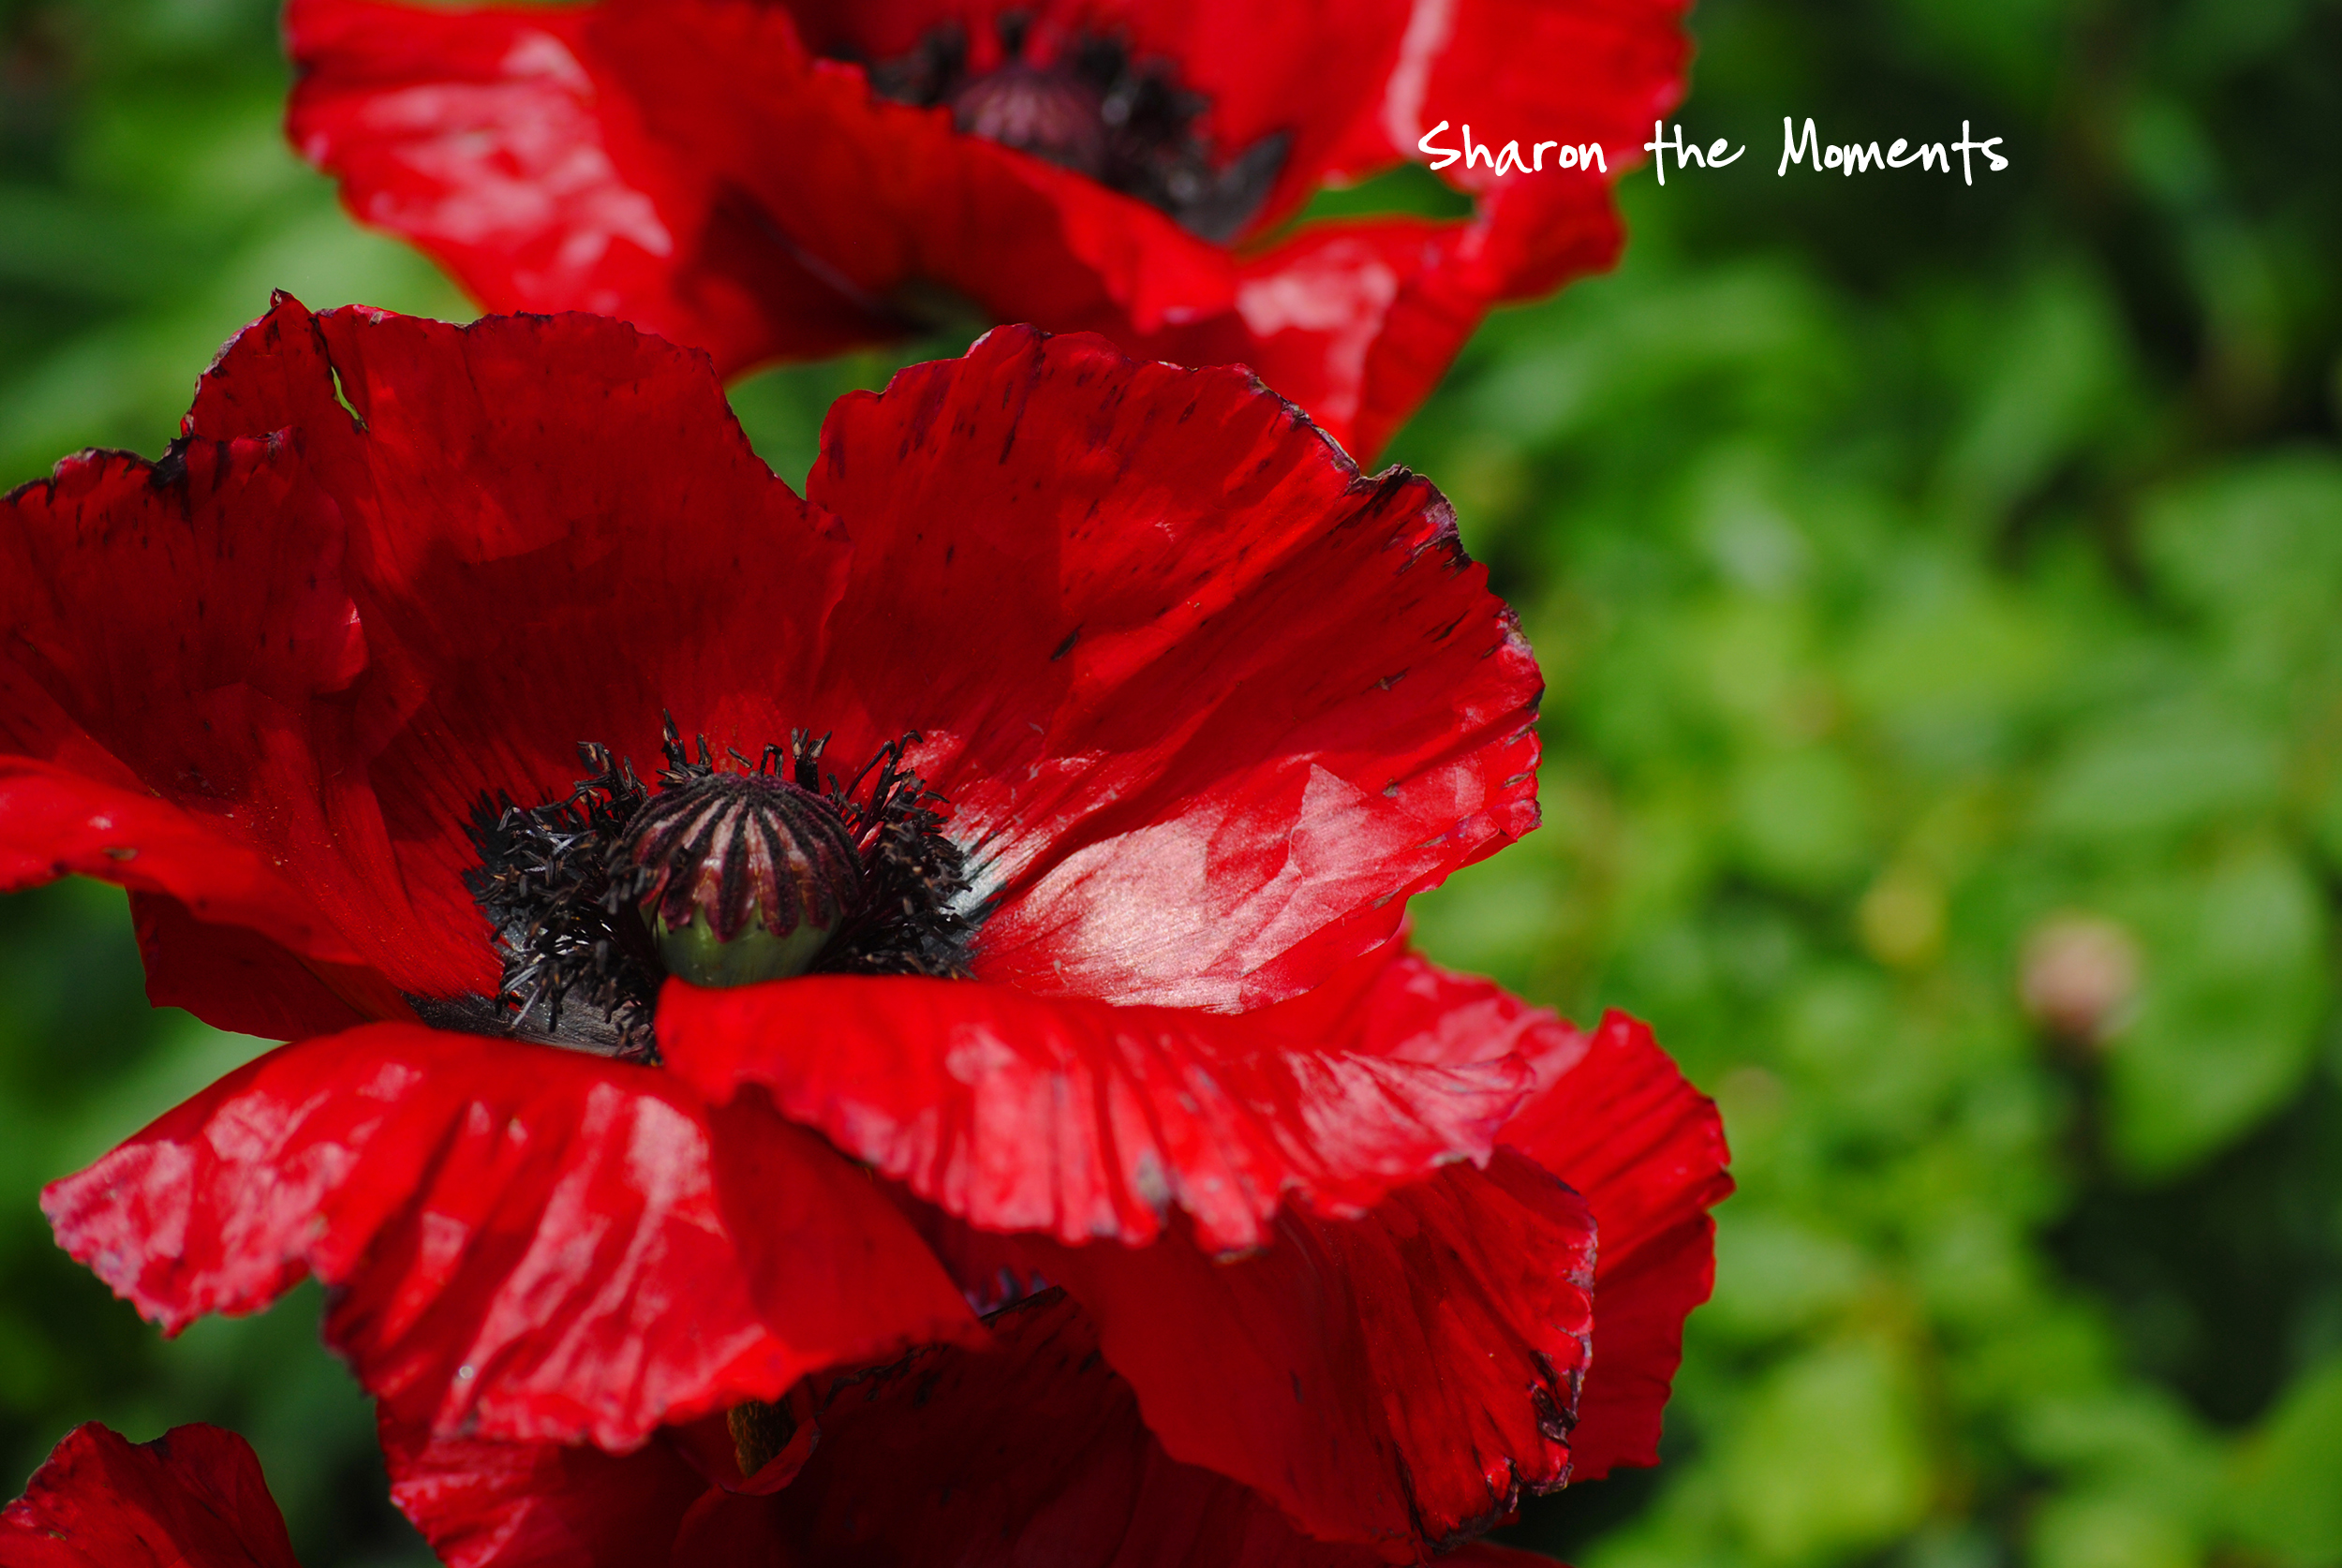 Favorite Photo Friday Eye Pleasing Red Poppies|Sharon the Moments blog